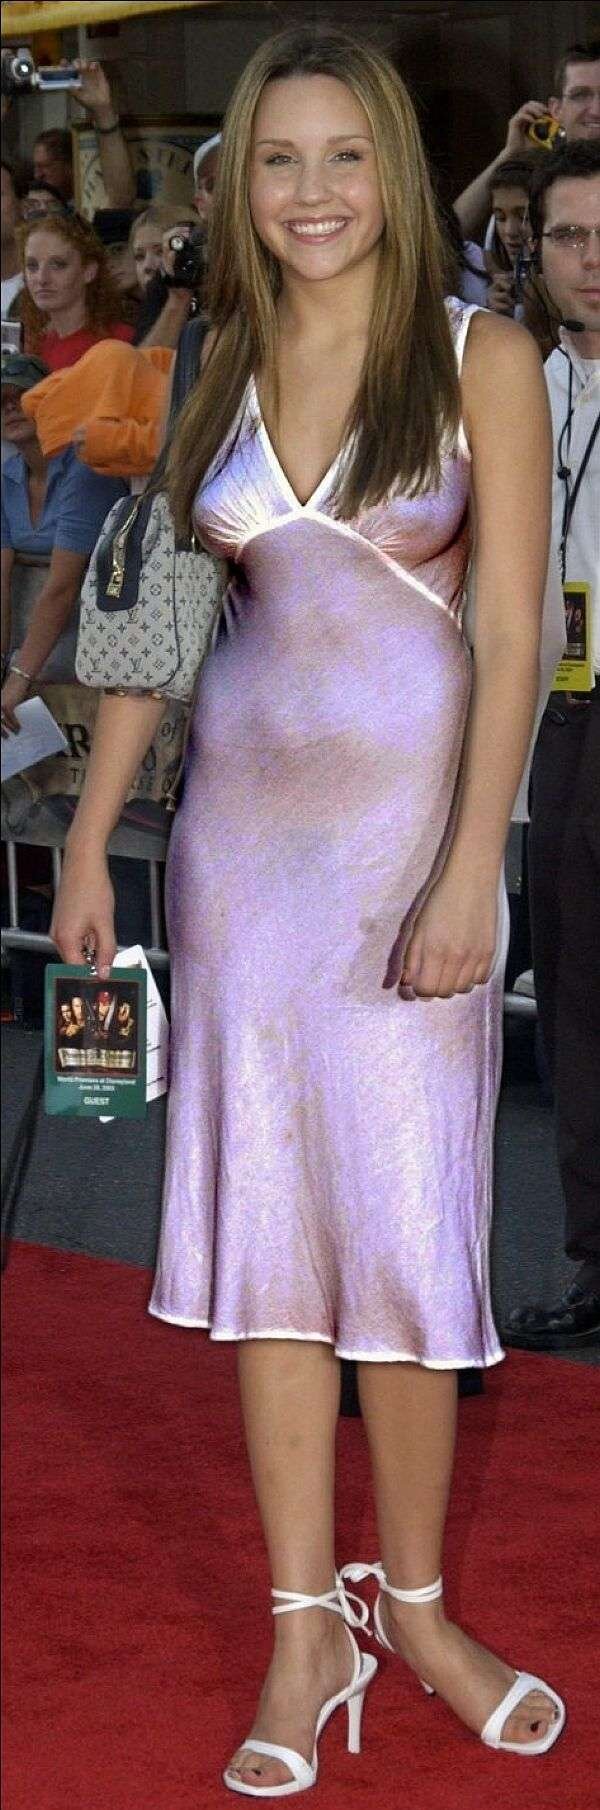 Amanda Bynes, Puffies On The Red Carpet? Very Nice Accessory picture